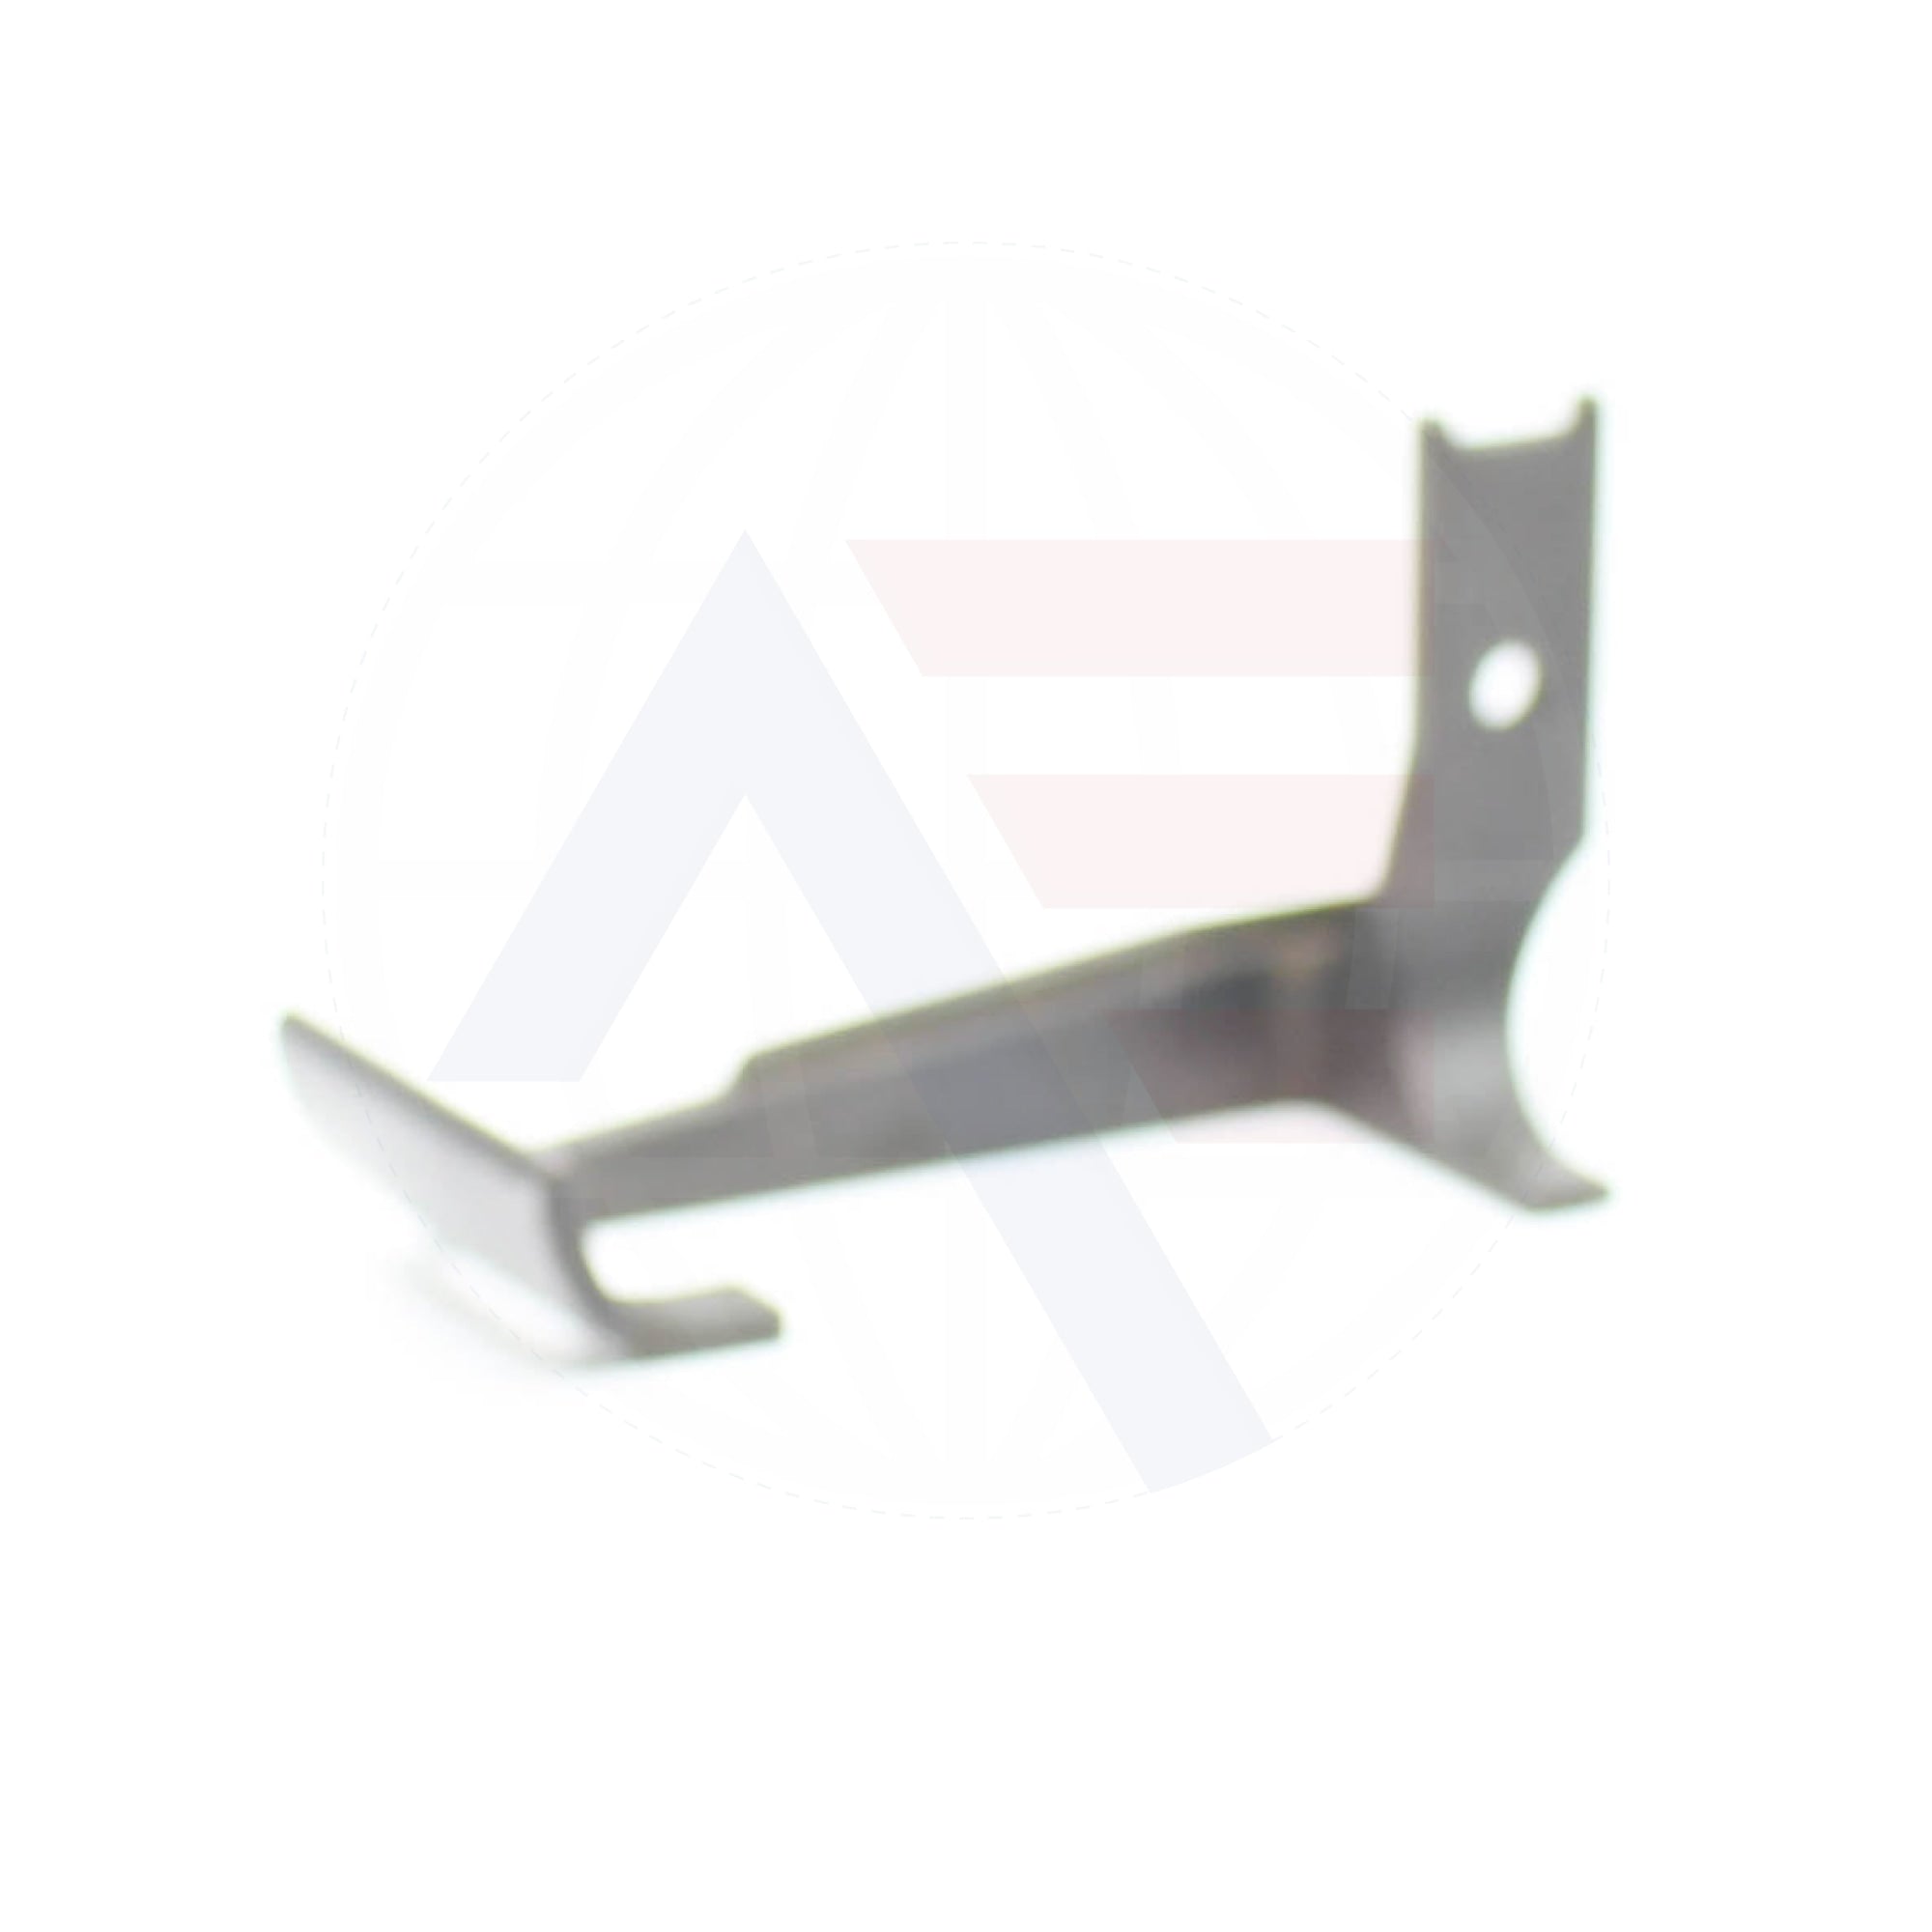 Aeb1 Outside Foot Sewing Machine Spare Parts